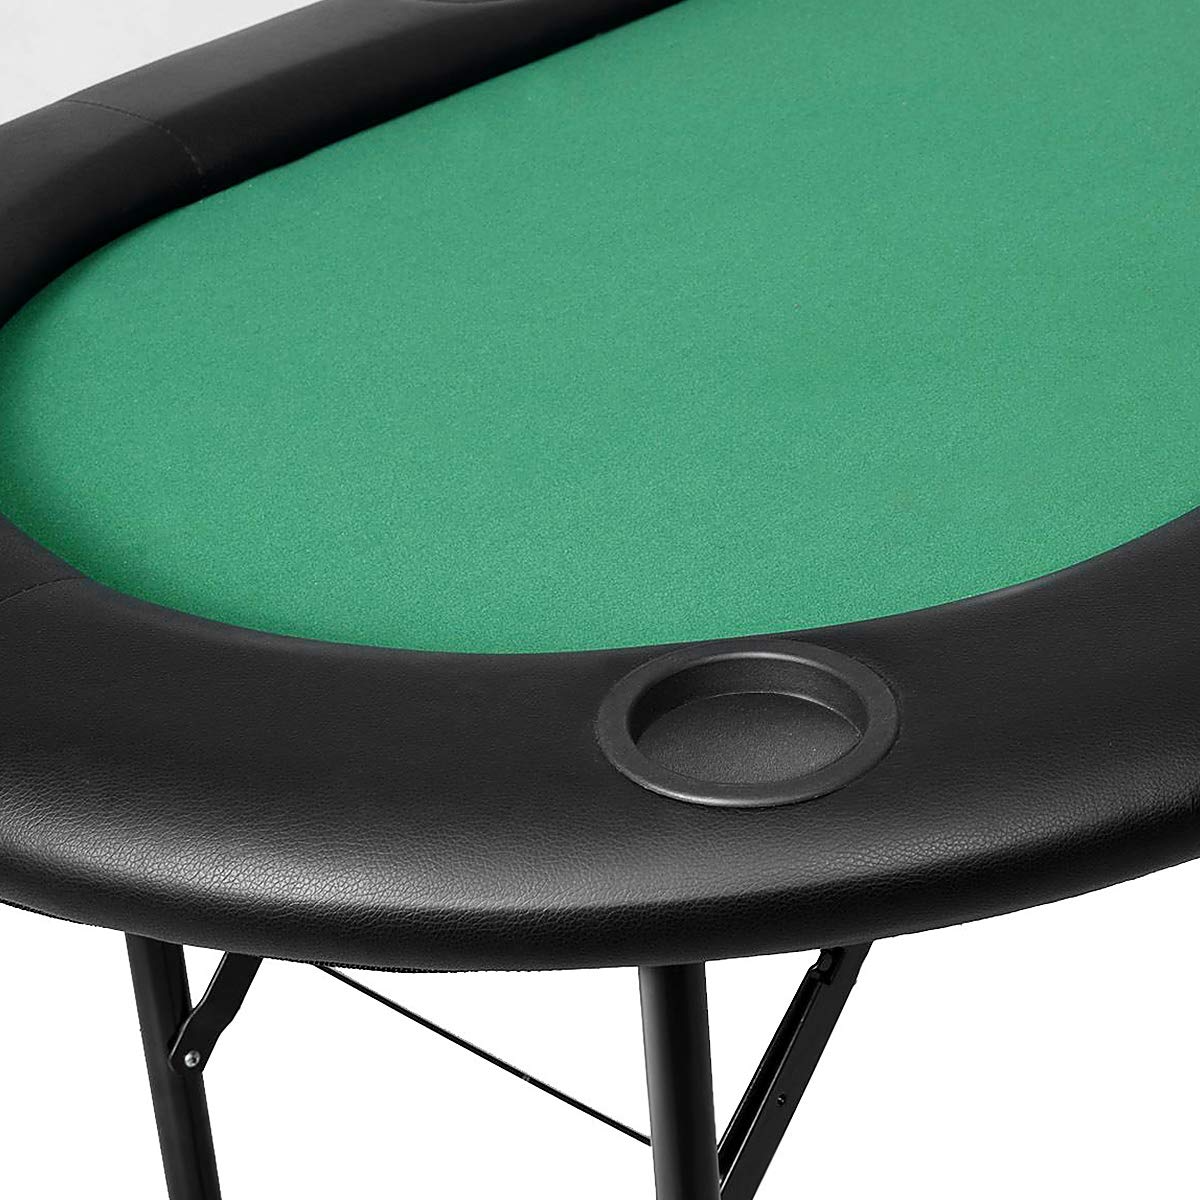 Giantex Foldable Play Poker Table w/Cup Holder, for Texas Casino Leisure Game Room,